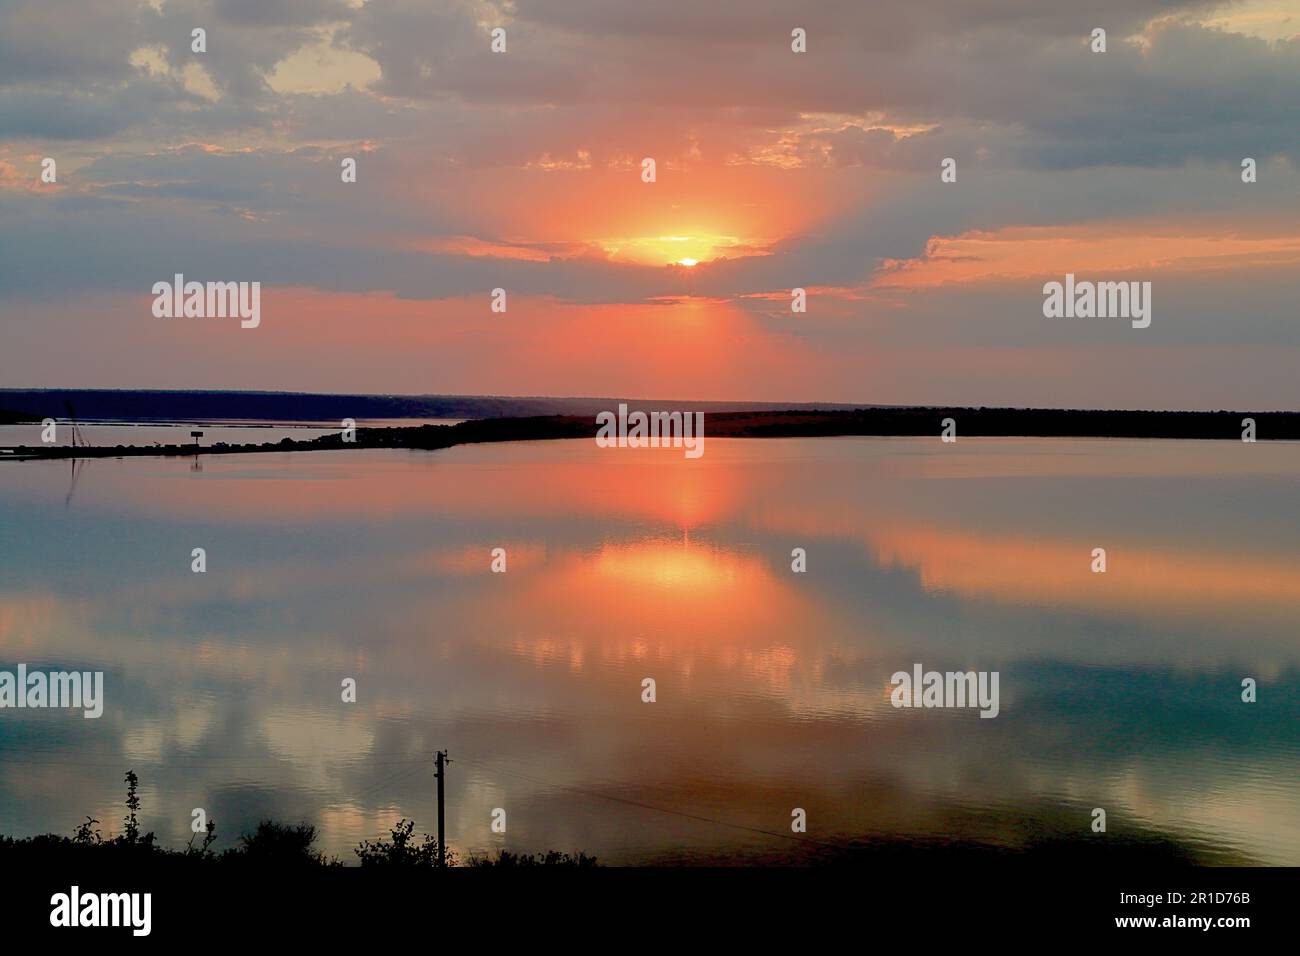 The photo was taken in Ukraine near the city of Odessa. The picture shows a sunset over a calm estuary reflecting the evening sky. Stock Photo